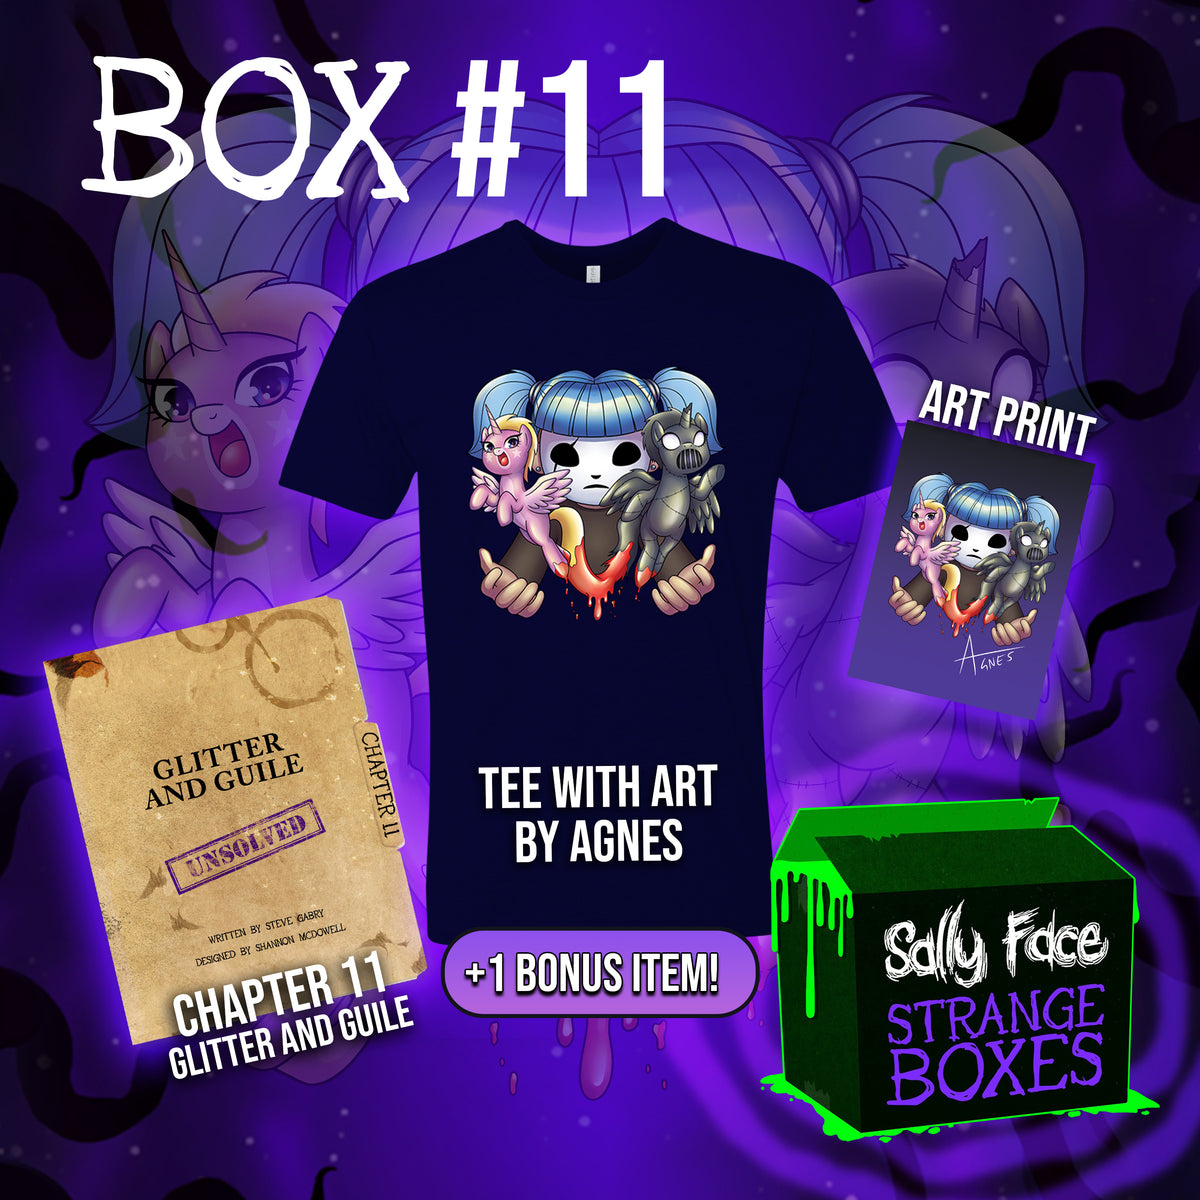 Sally Face: Strange Boxes - Annual Subscription